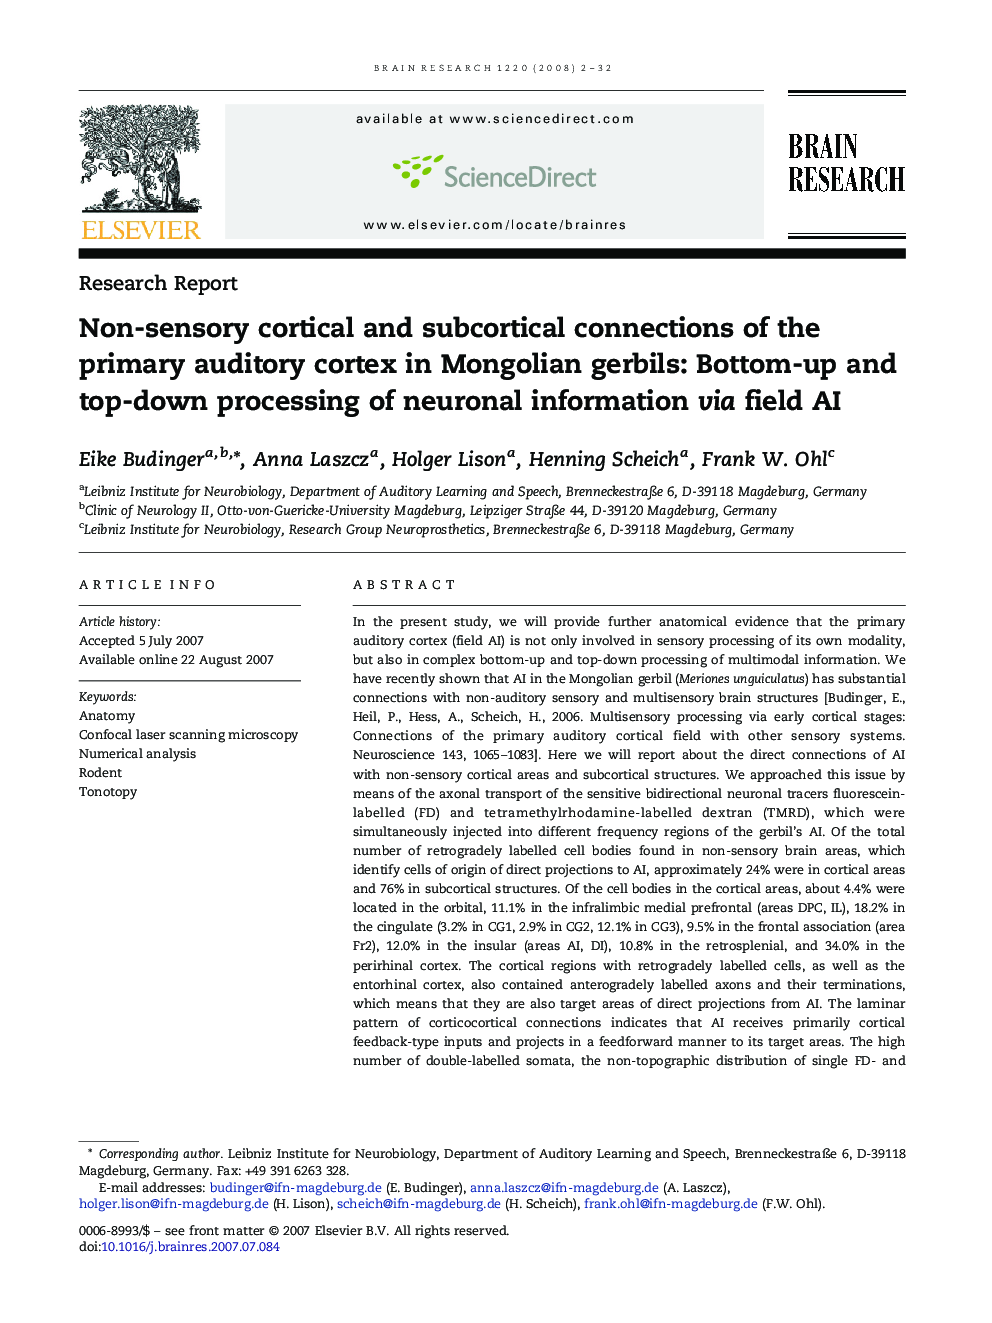 Non-sensory cortical and subcortical connections of the primary auditory cortex in Mongolian gerbils: Bottom-up and top-down processing of neuronal information via field AI